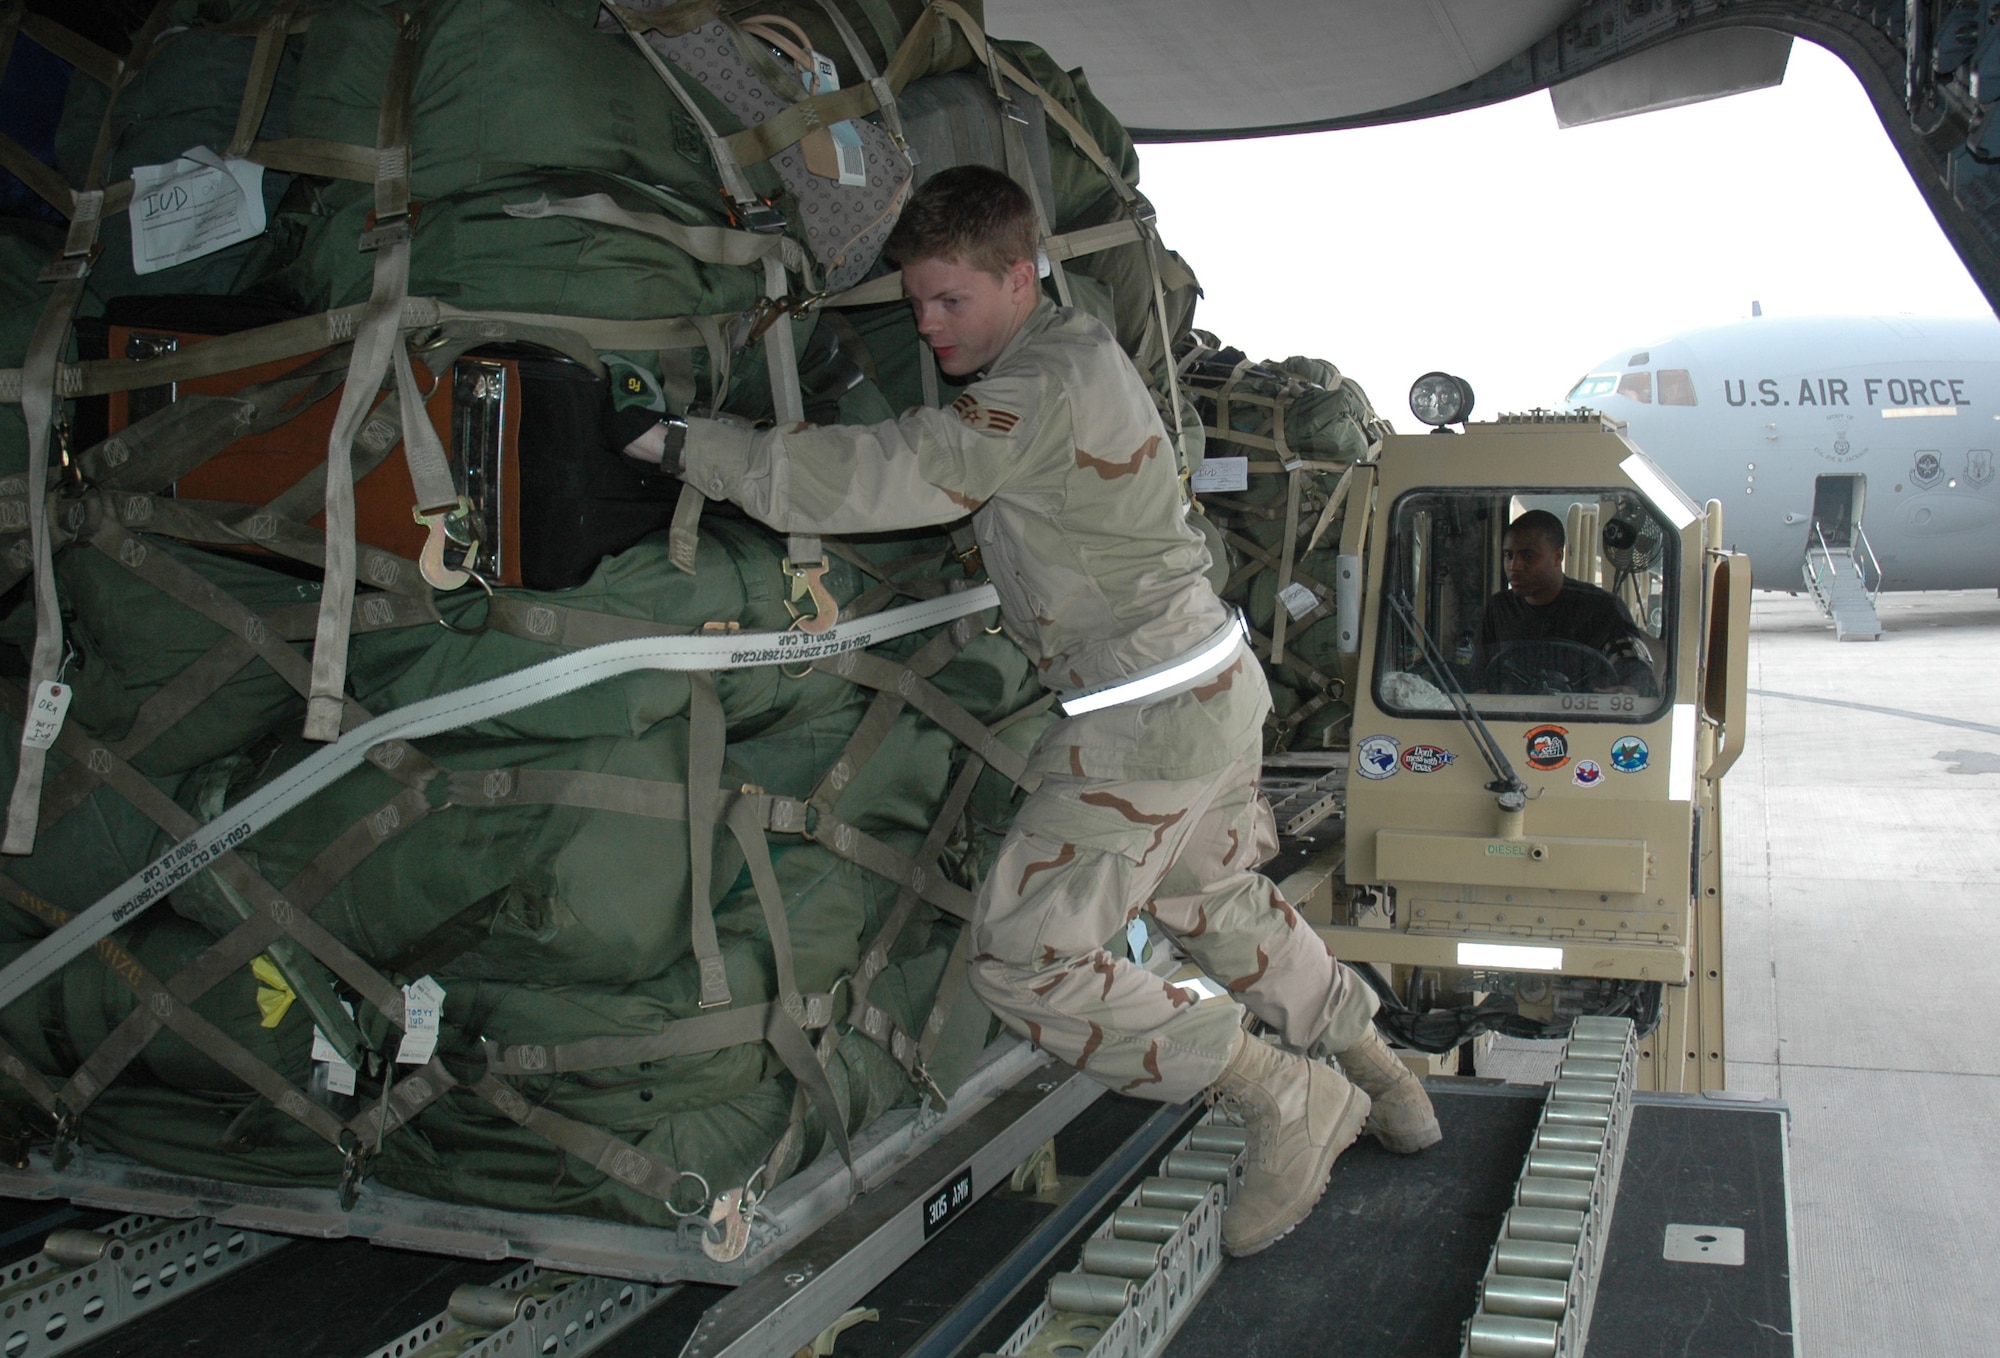 Senior Airman Aaron Brewer helps push a pallet into a C-17 Globemaster III while Airman 1st Class Armel Trollinger operates a 60K loader. Both are aerial porters assigned to the 8th Expeditionary Air Mobility Squadron. (U.S. Air Force photo\Senior Airman Erik Hofmeyer)